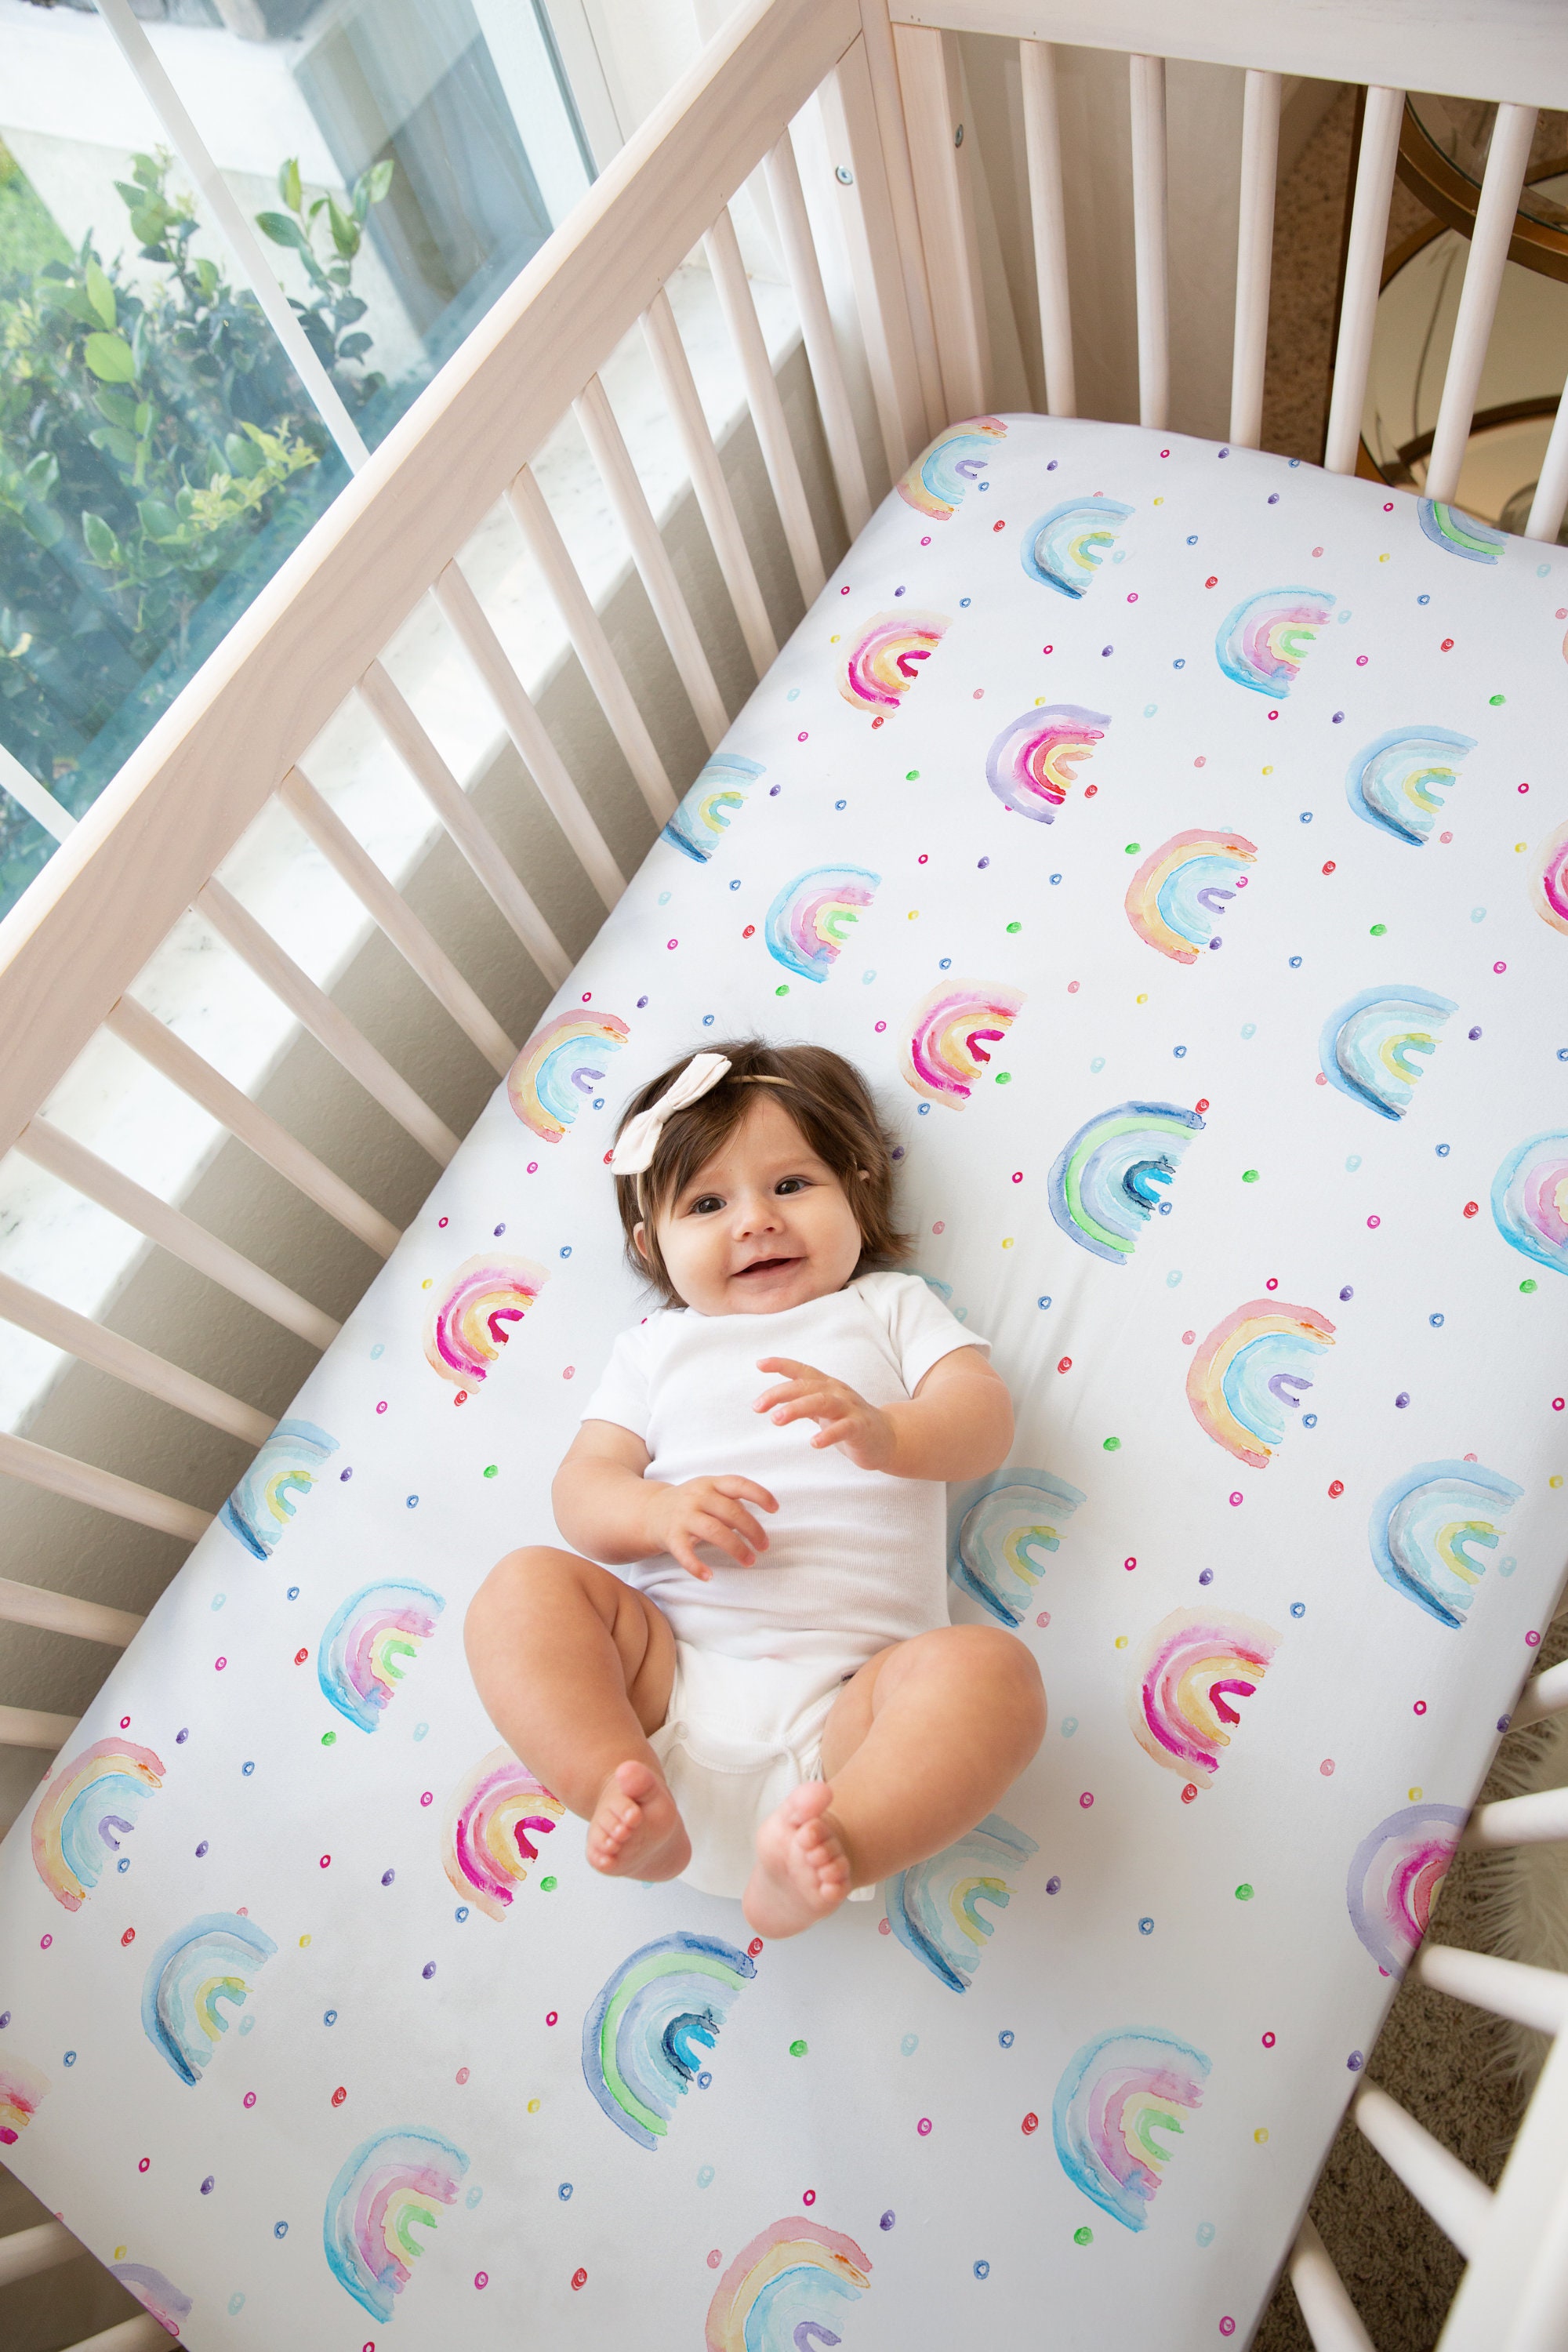 Unicorn and Rainbow crib sheet.Toddler Fitted sheet.Nursery Bedding.Changing pad cover.Pillowcase